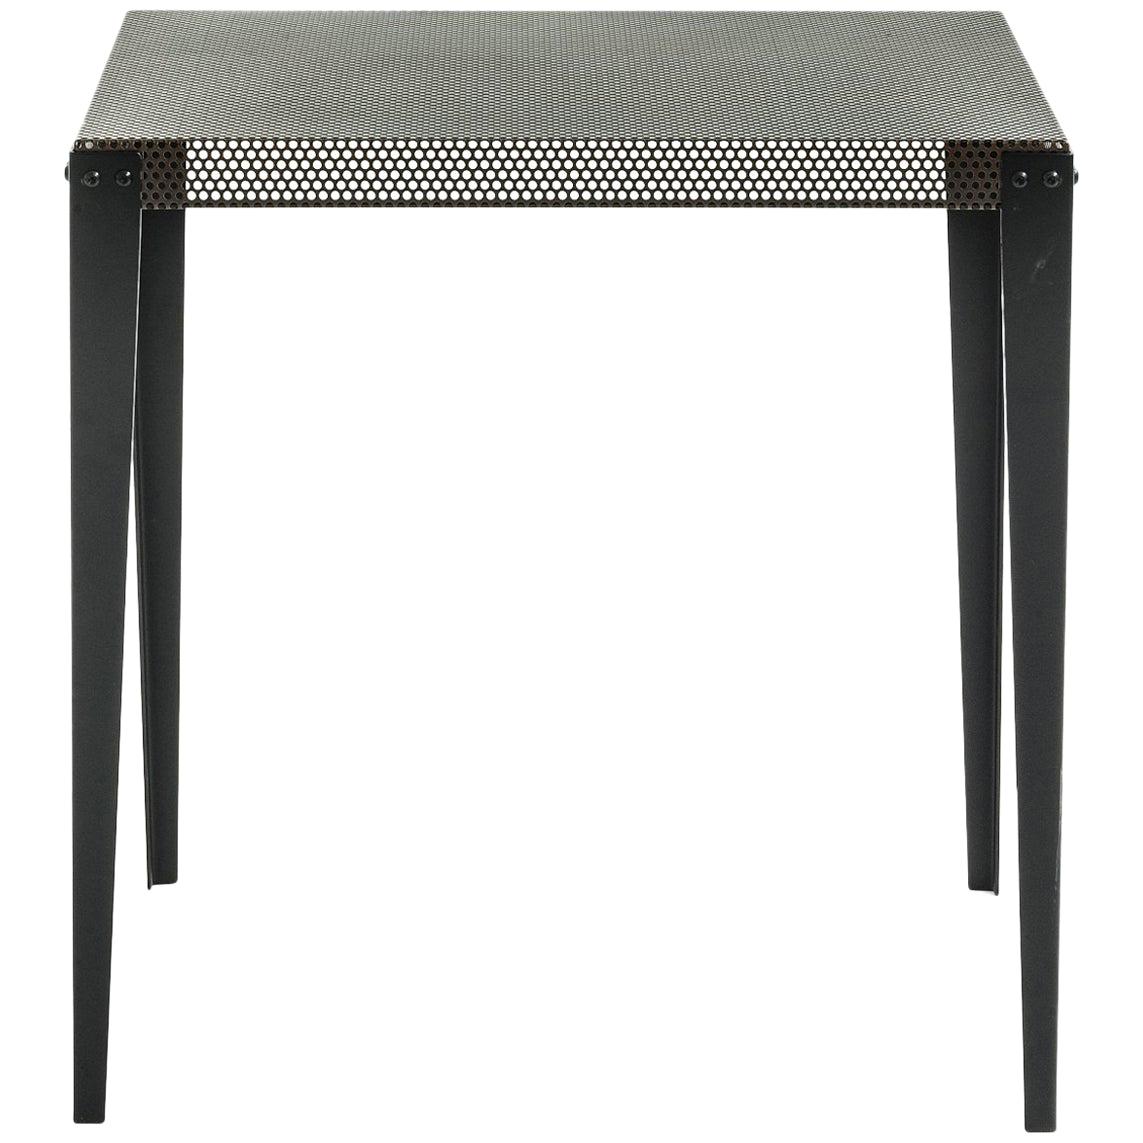 "Nizza" Copper Varnished Perforated Steel Top Square Table by Moroso, Diesel For Sale